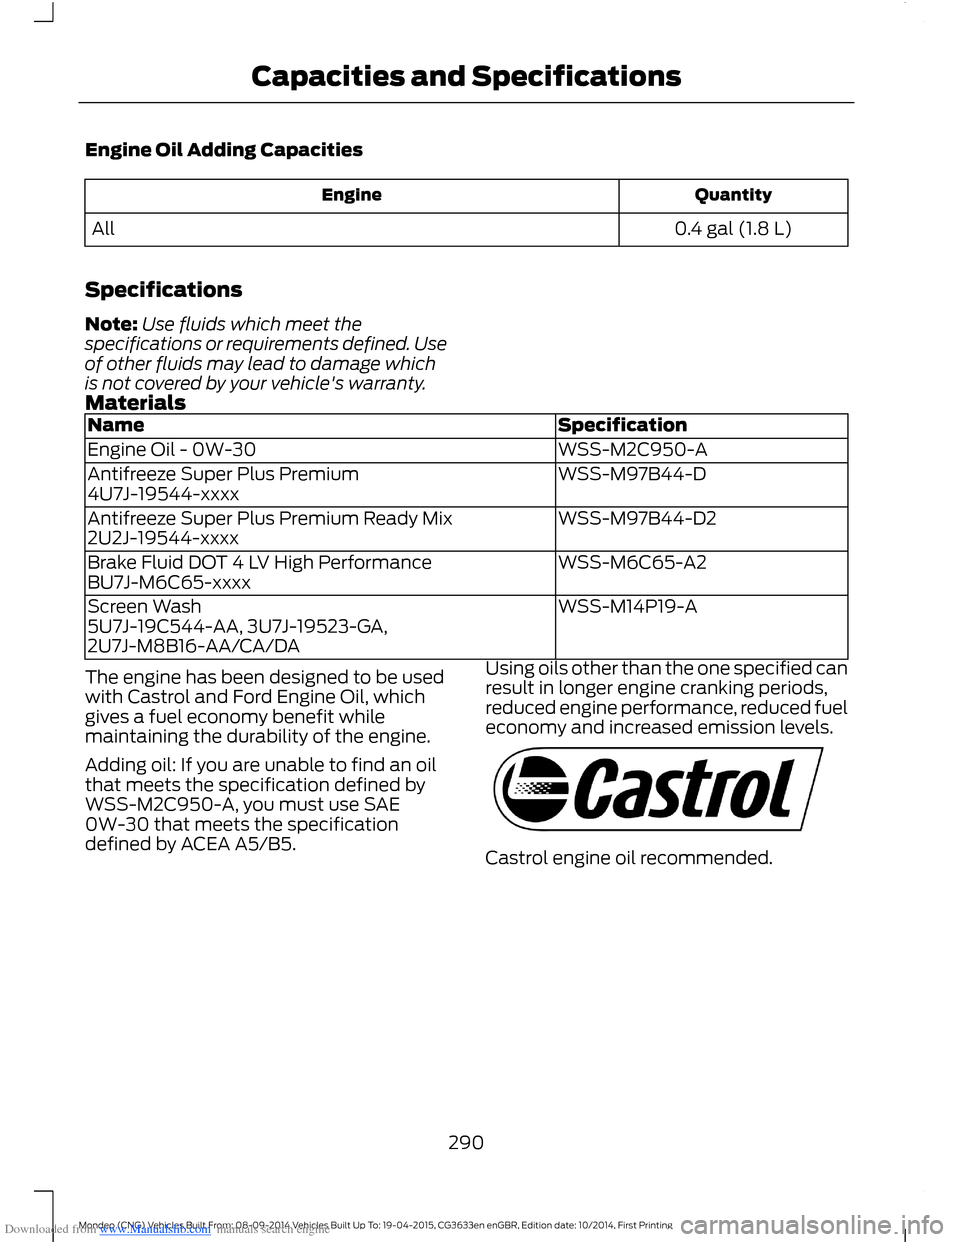 FORD MONDEO 2014 4.G User Guide Downloaded from www.Manualslib.com manuals search engine Engine Oil Adding Capacities
QuantityEngine
0.4 gal (1.8 L)All
Specifications
Note:Use fluids which meet thespecifications or requirements defi